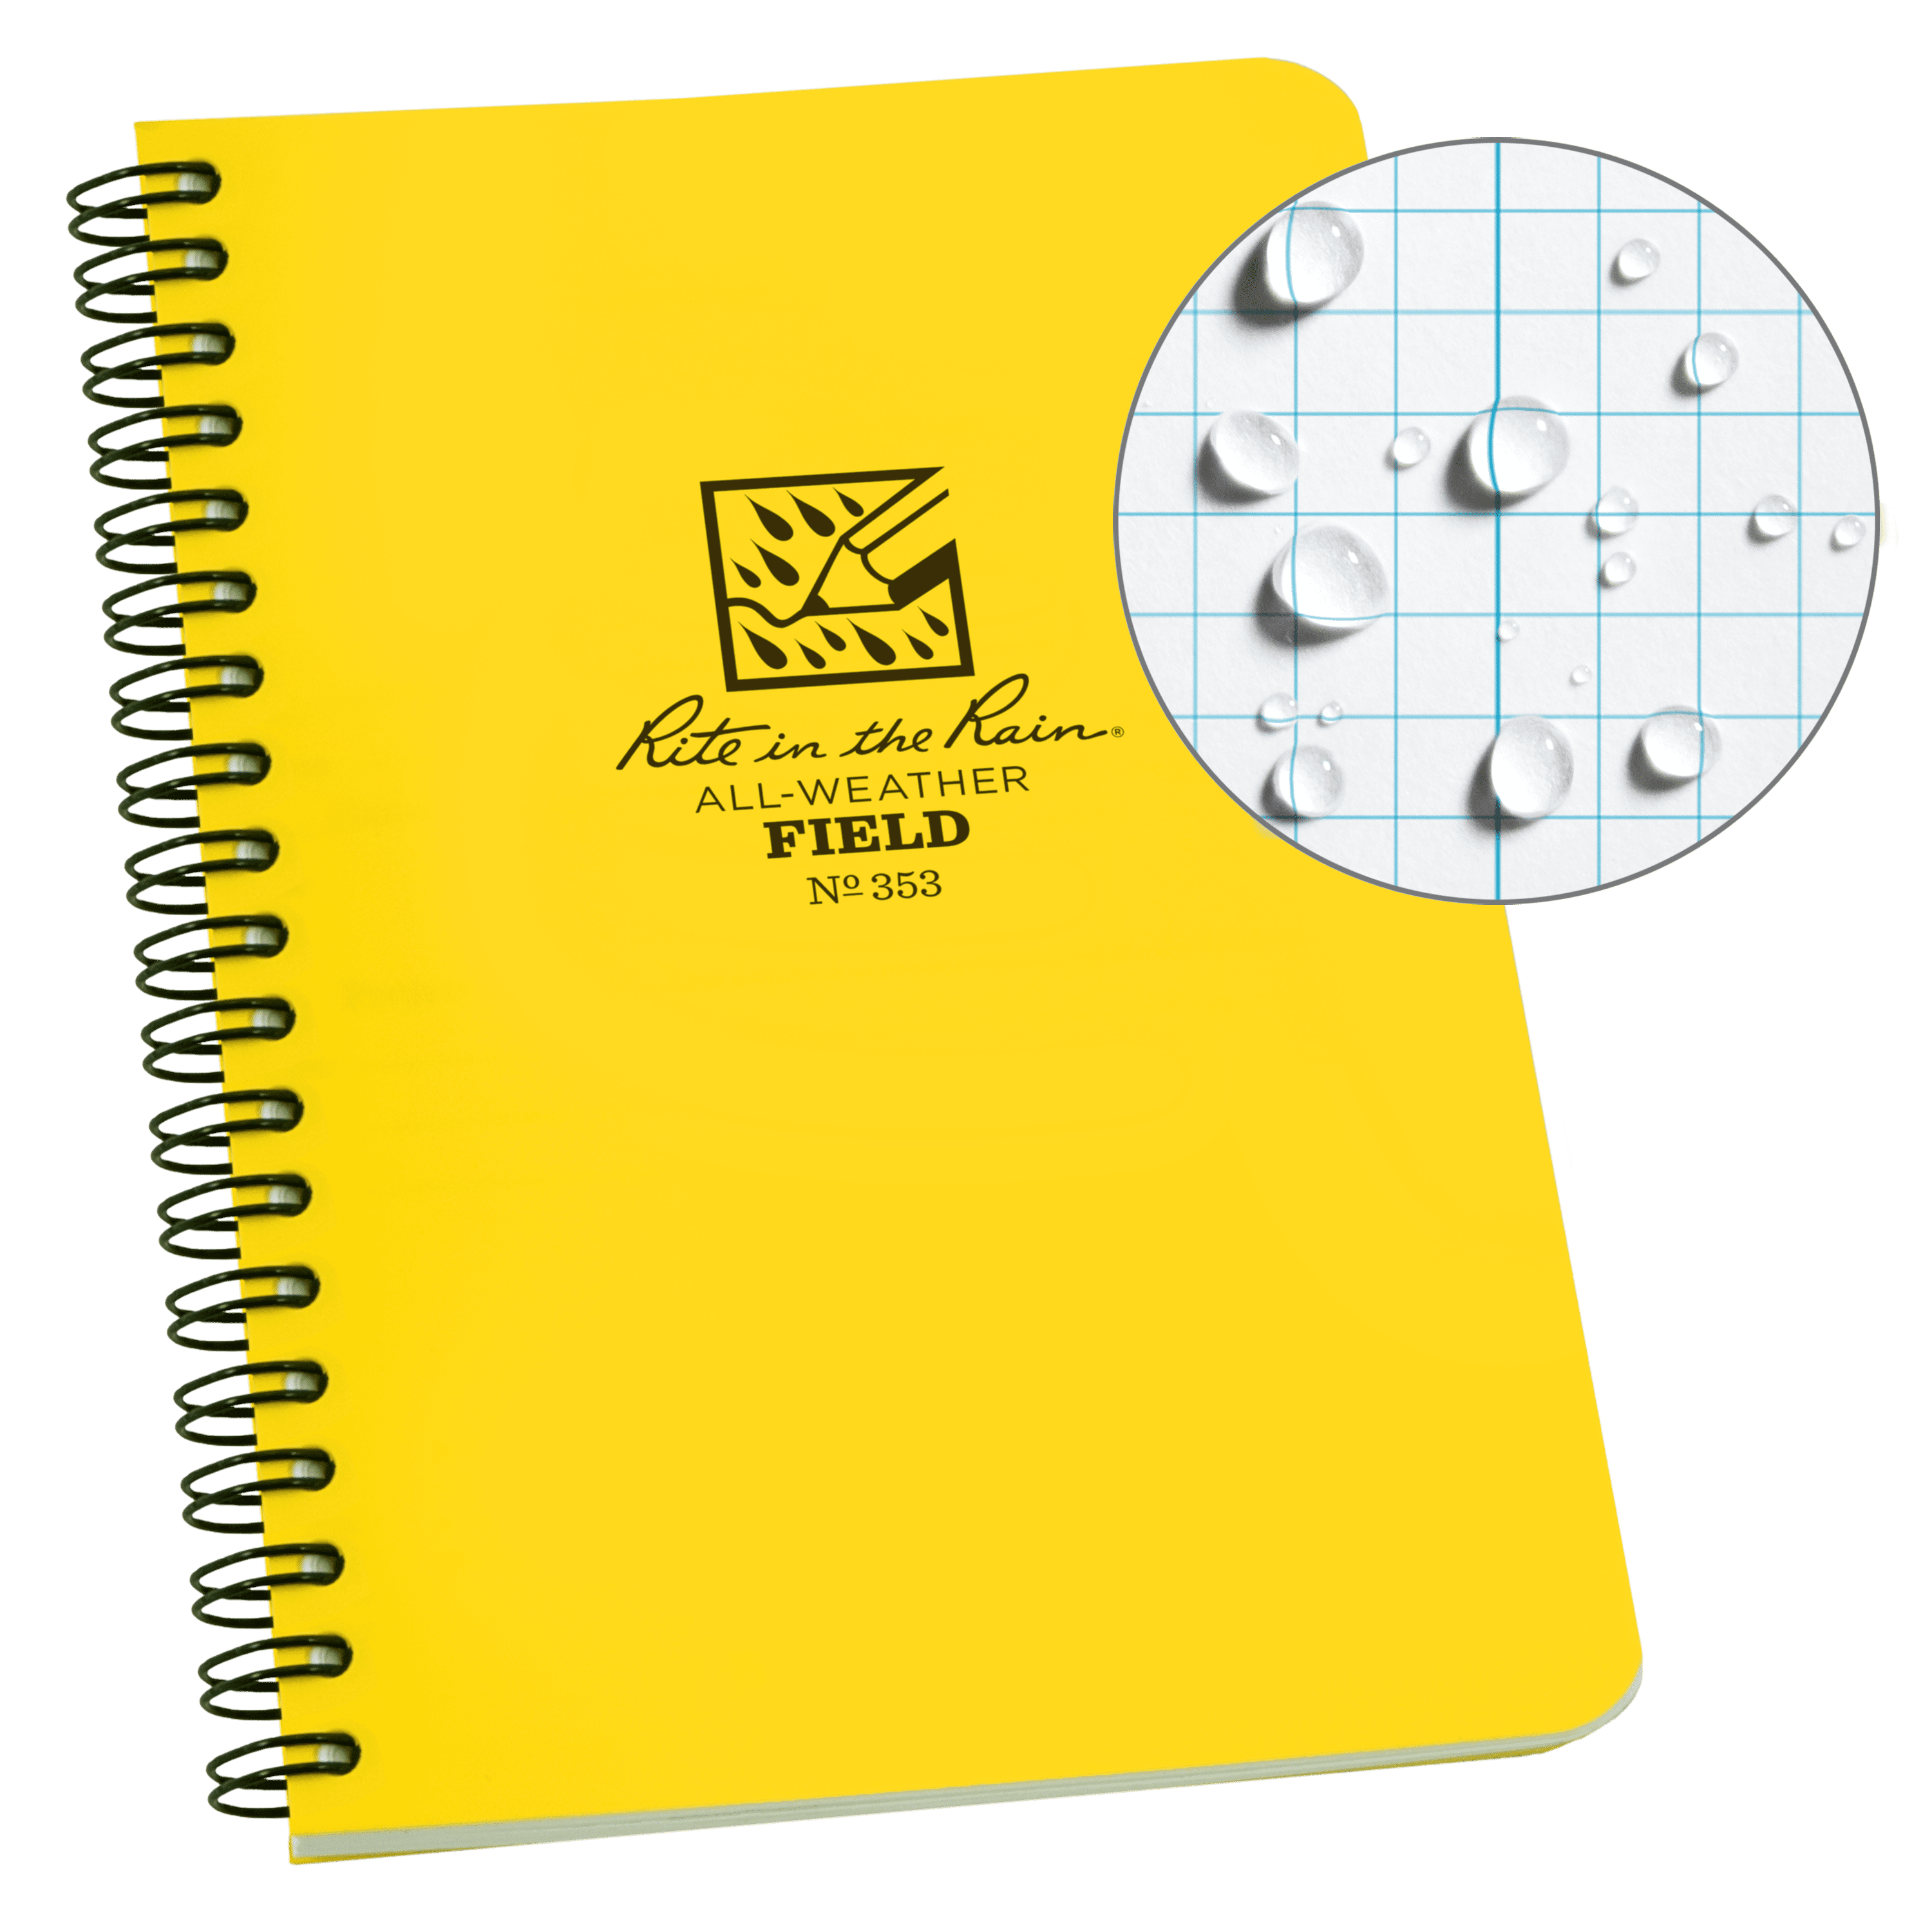 Blue Cover Rite in the Rain Weatherproof Side Spiral Notebook No. 273L3 Universal Pattern 3 Pack 4.875 x 7